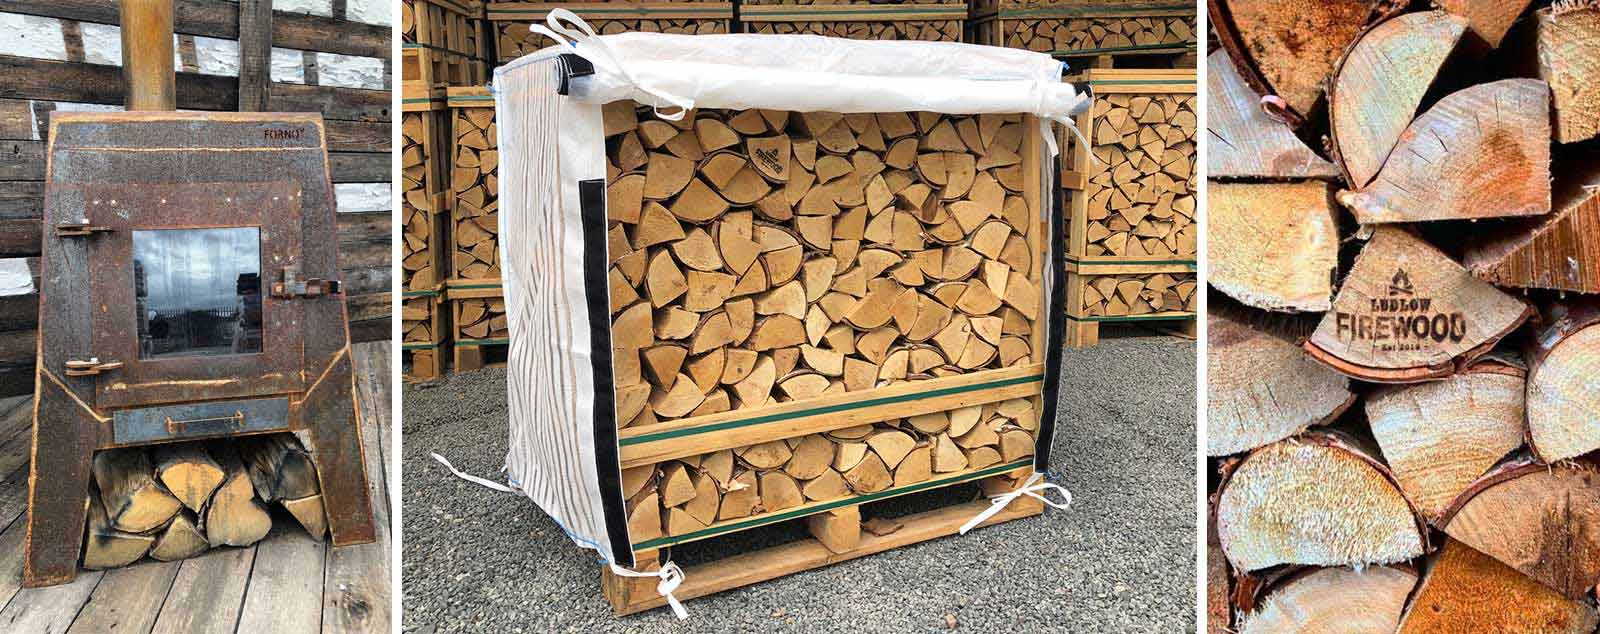 Our firewood